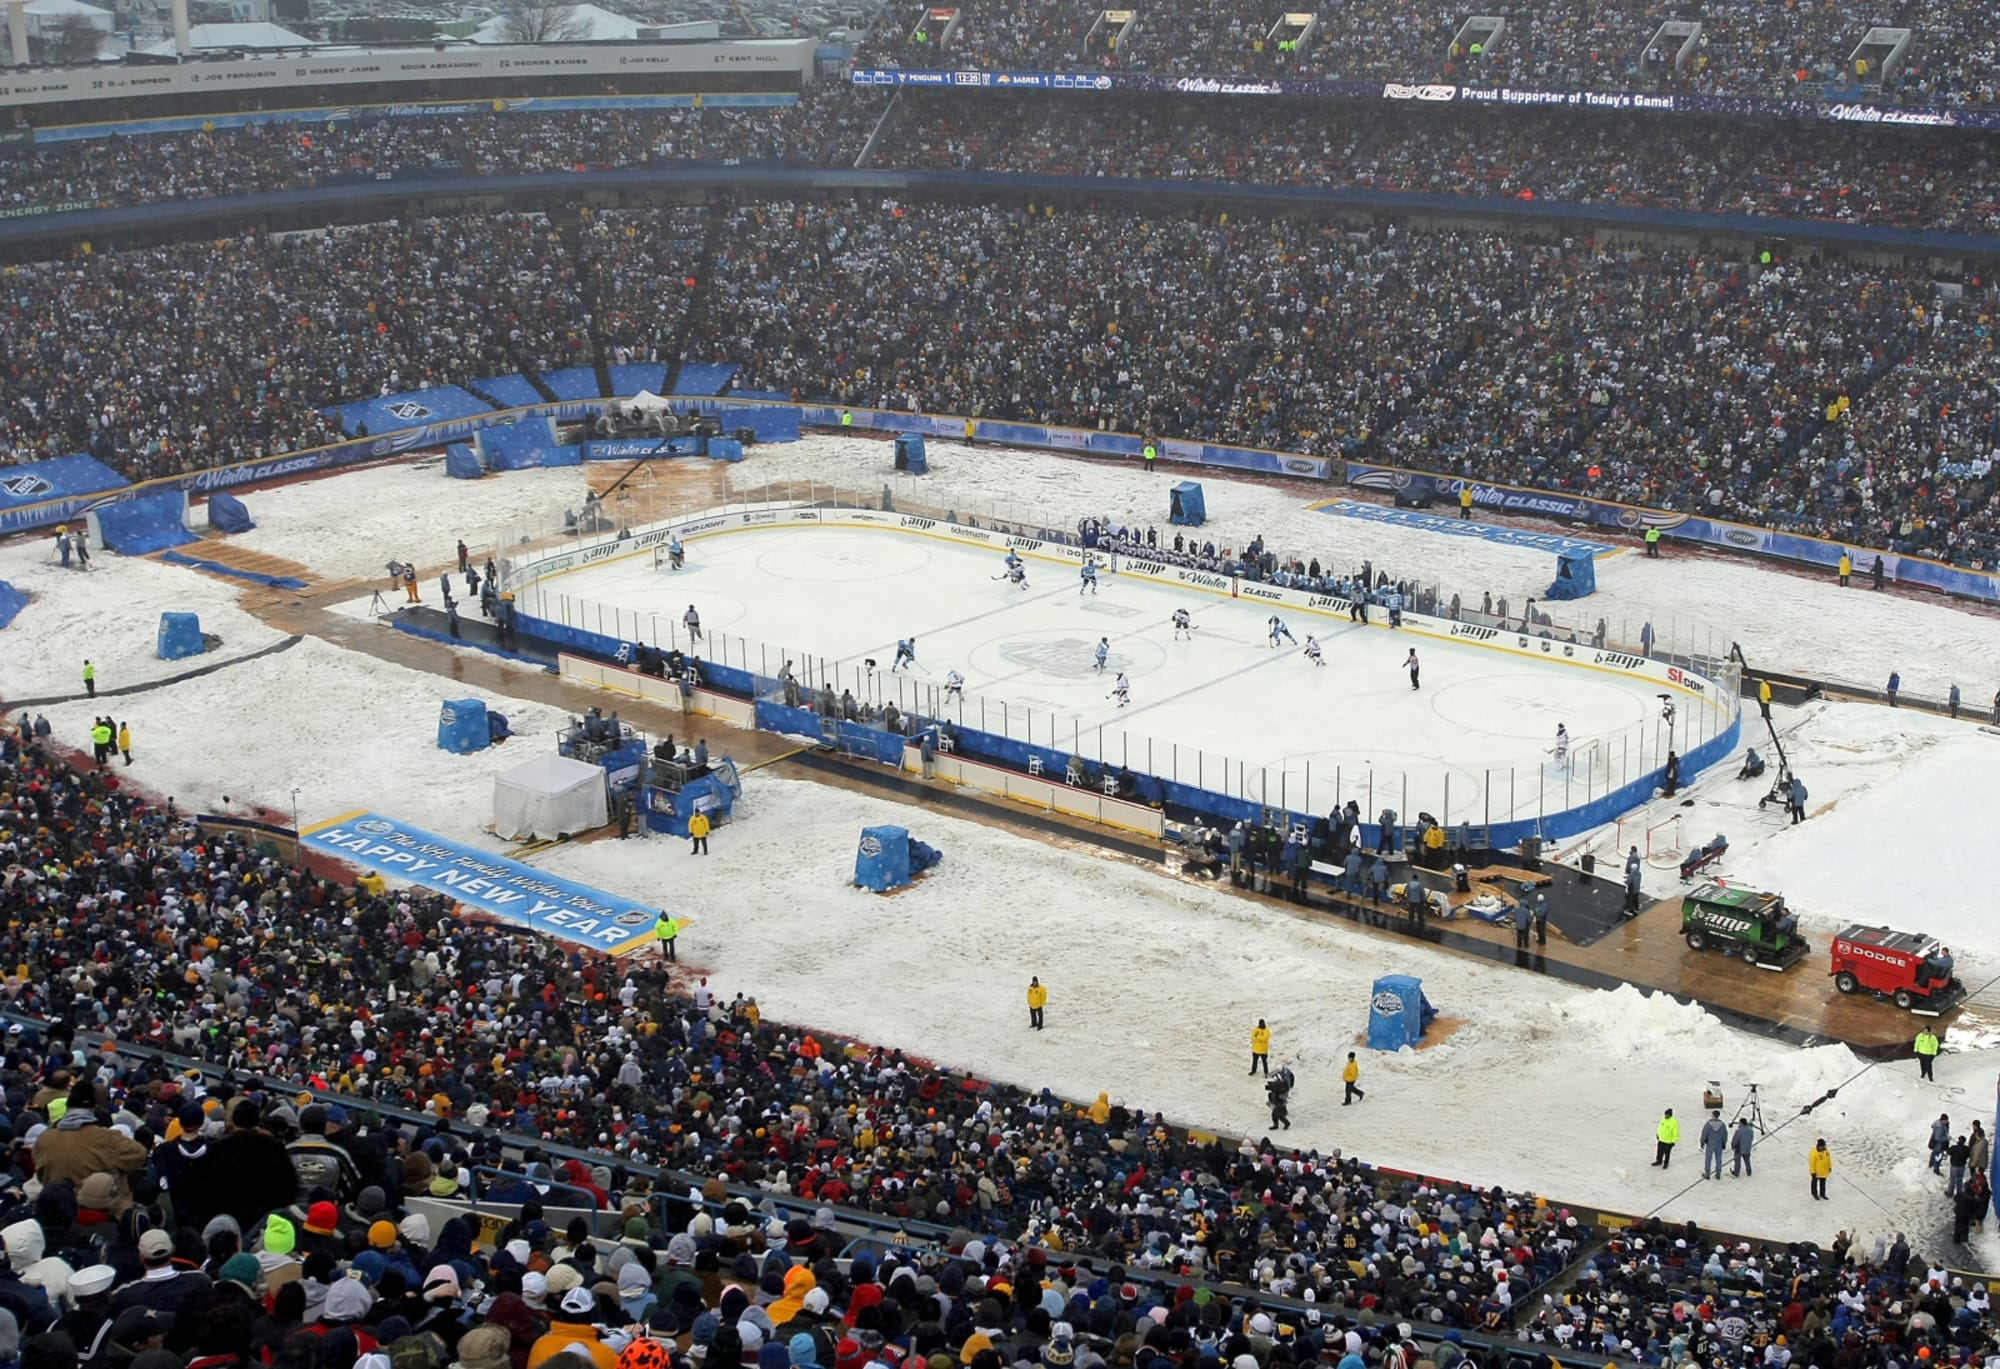 Could we see some outdoor Sabres games this year?